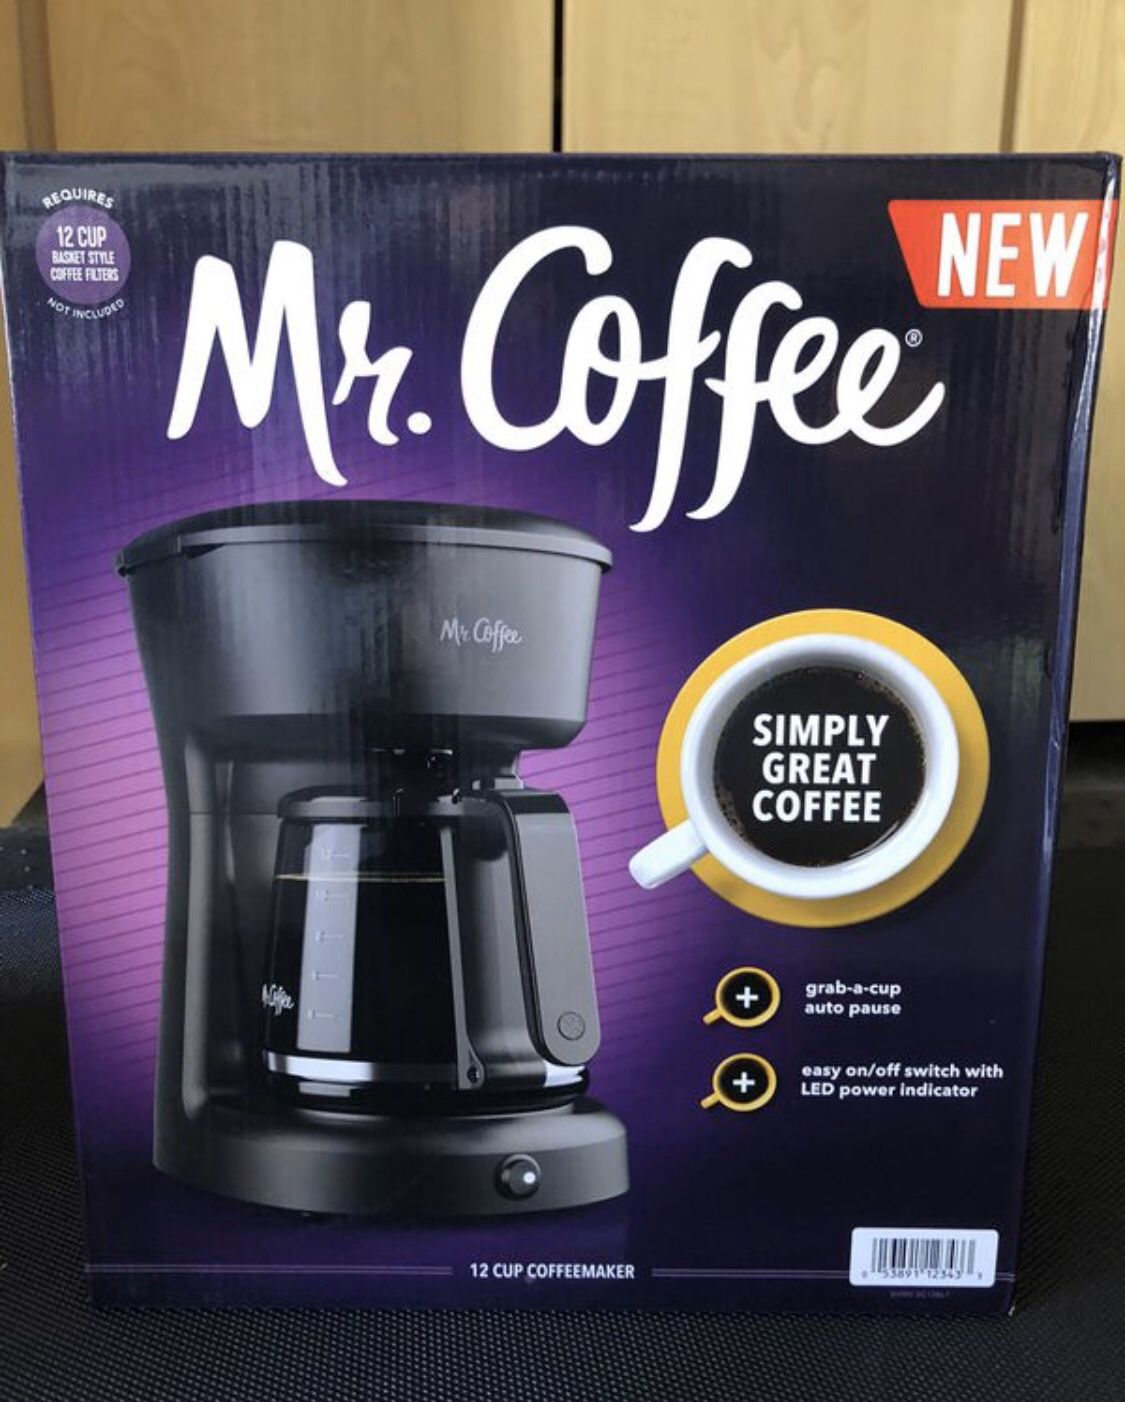 Mr. Coffee 12 cup coffee maker (Brand new in box!)